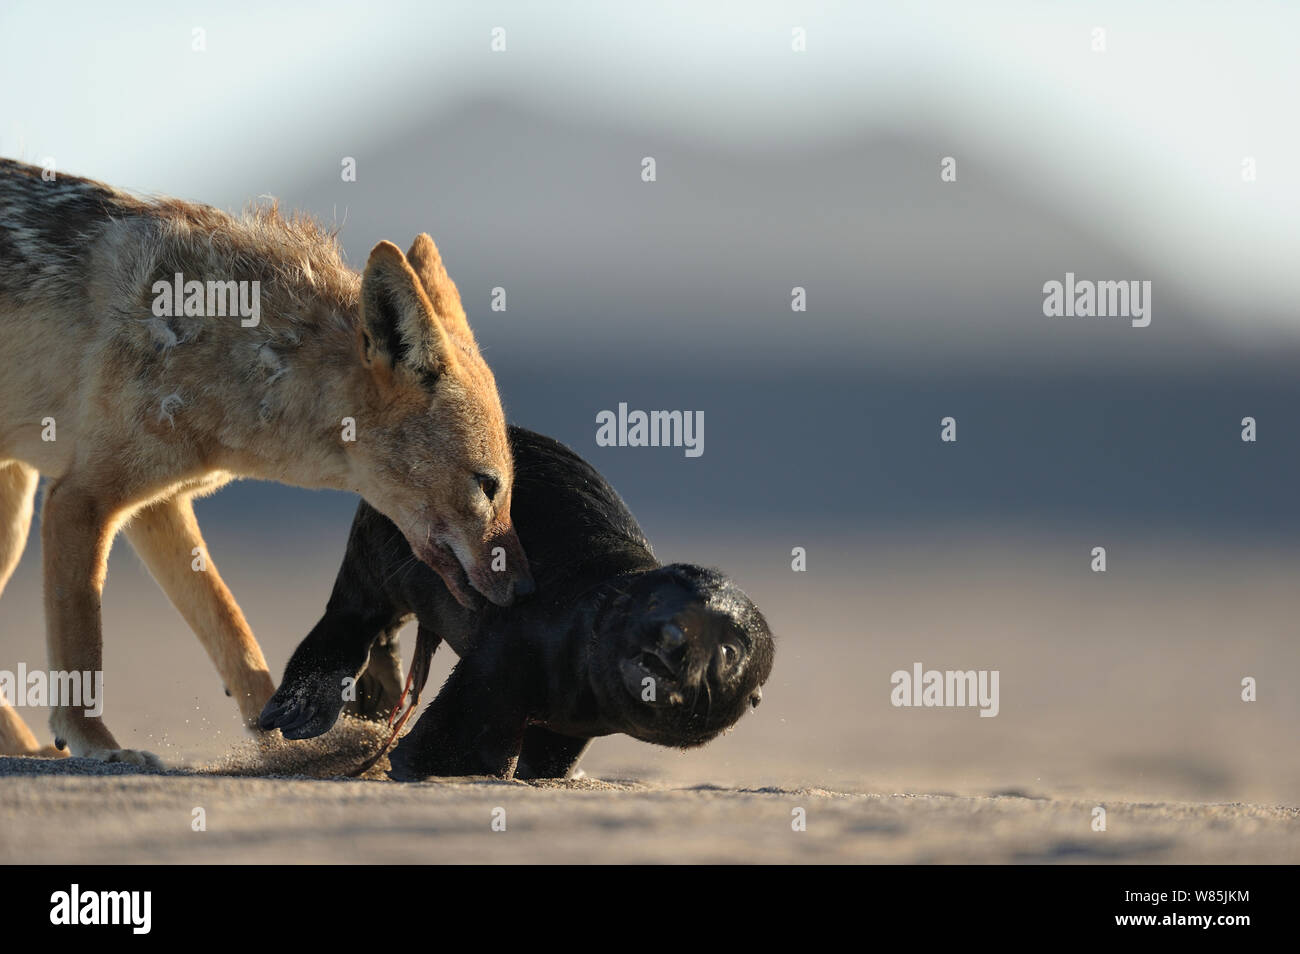 Black backed jackal (Canis mesomelas) attacking Cape fur seal (Arctocephalus pusillus) pup, Sperrgebiet National Park, Namibia, December. Sequence 2/6 Stock Photo